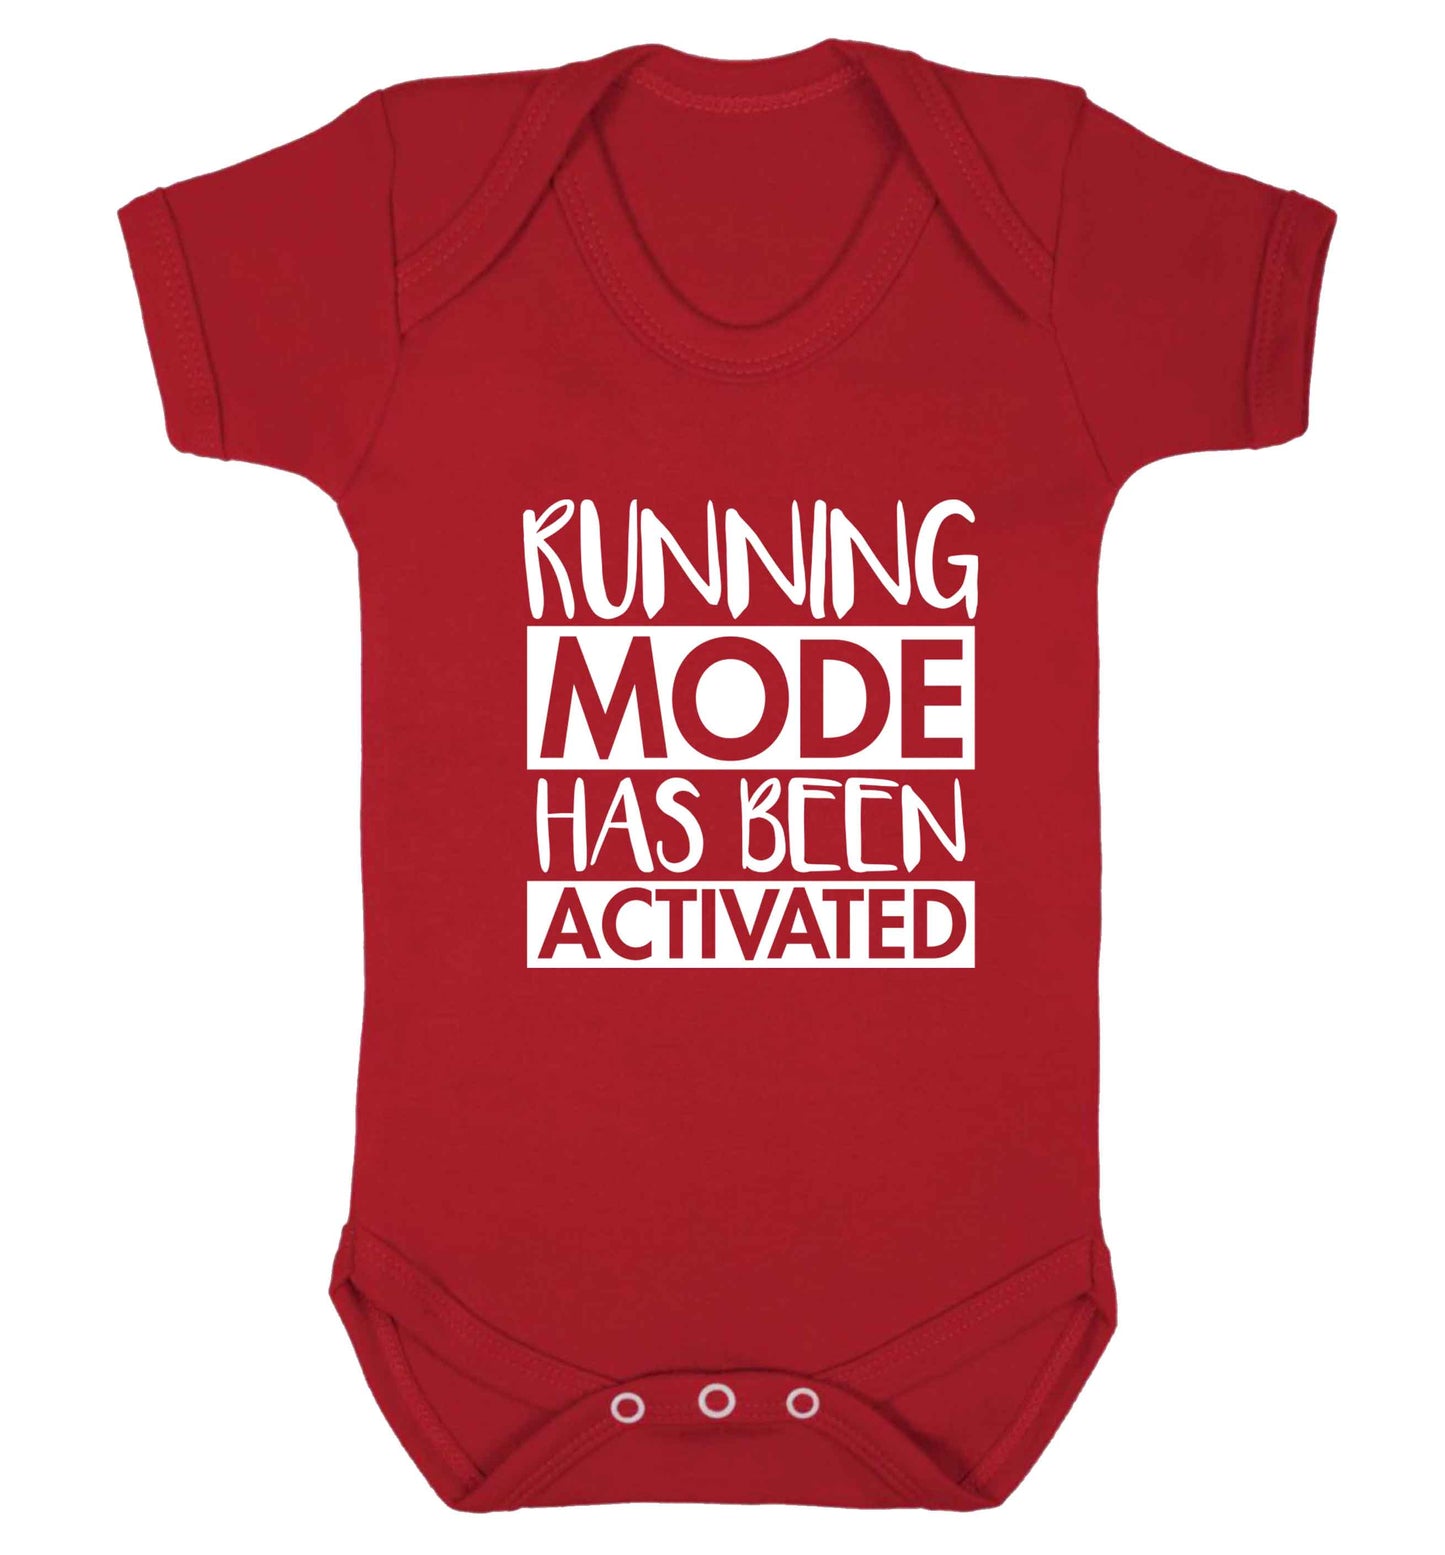 Running mode has been activated baby vest red 18-24 months